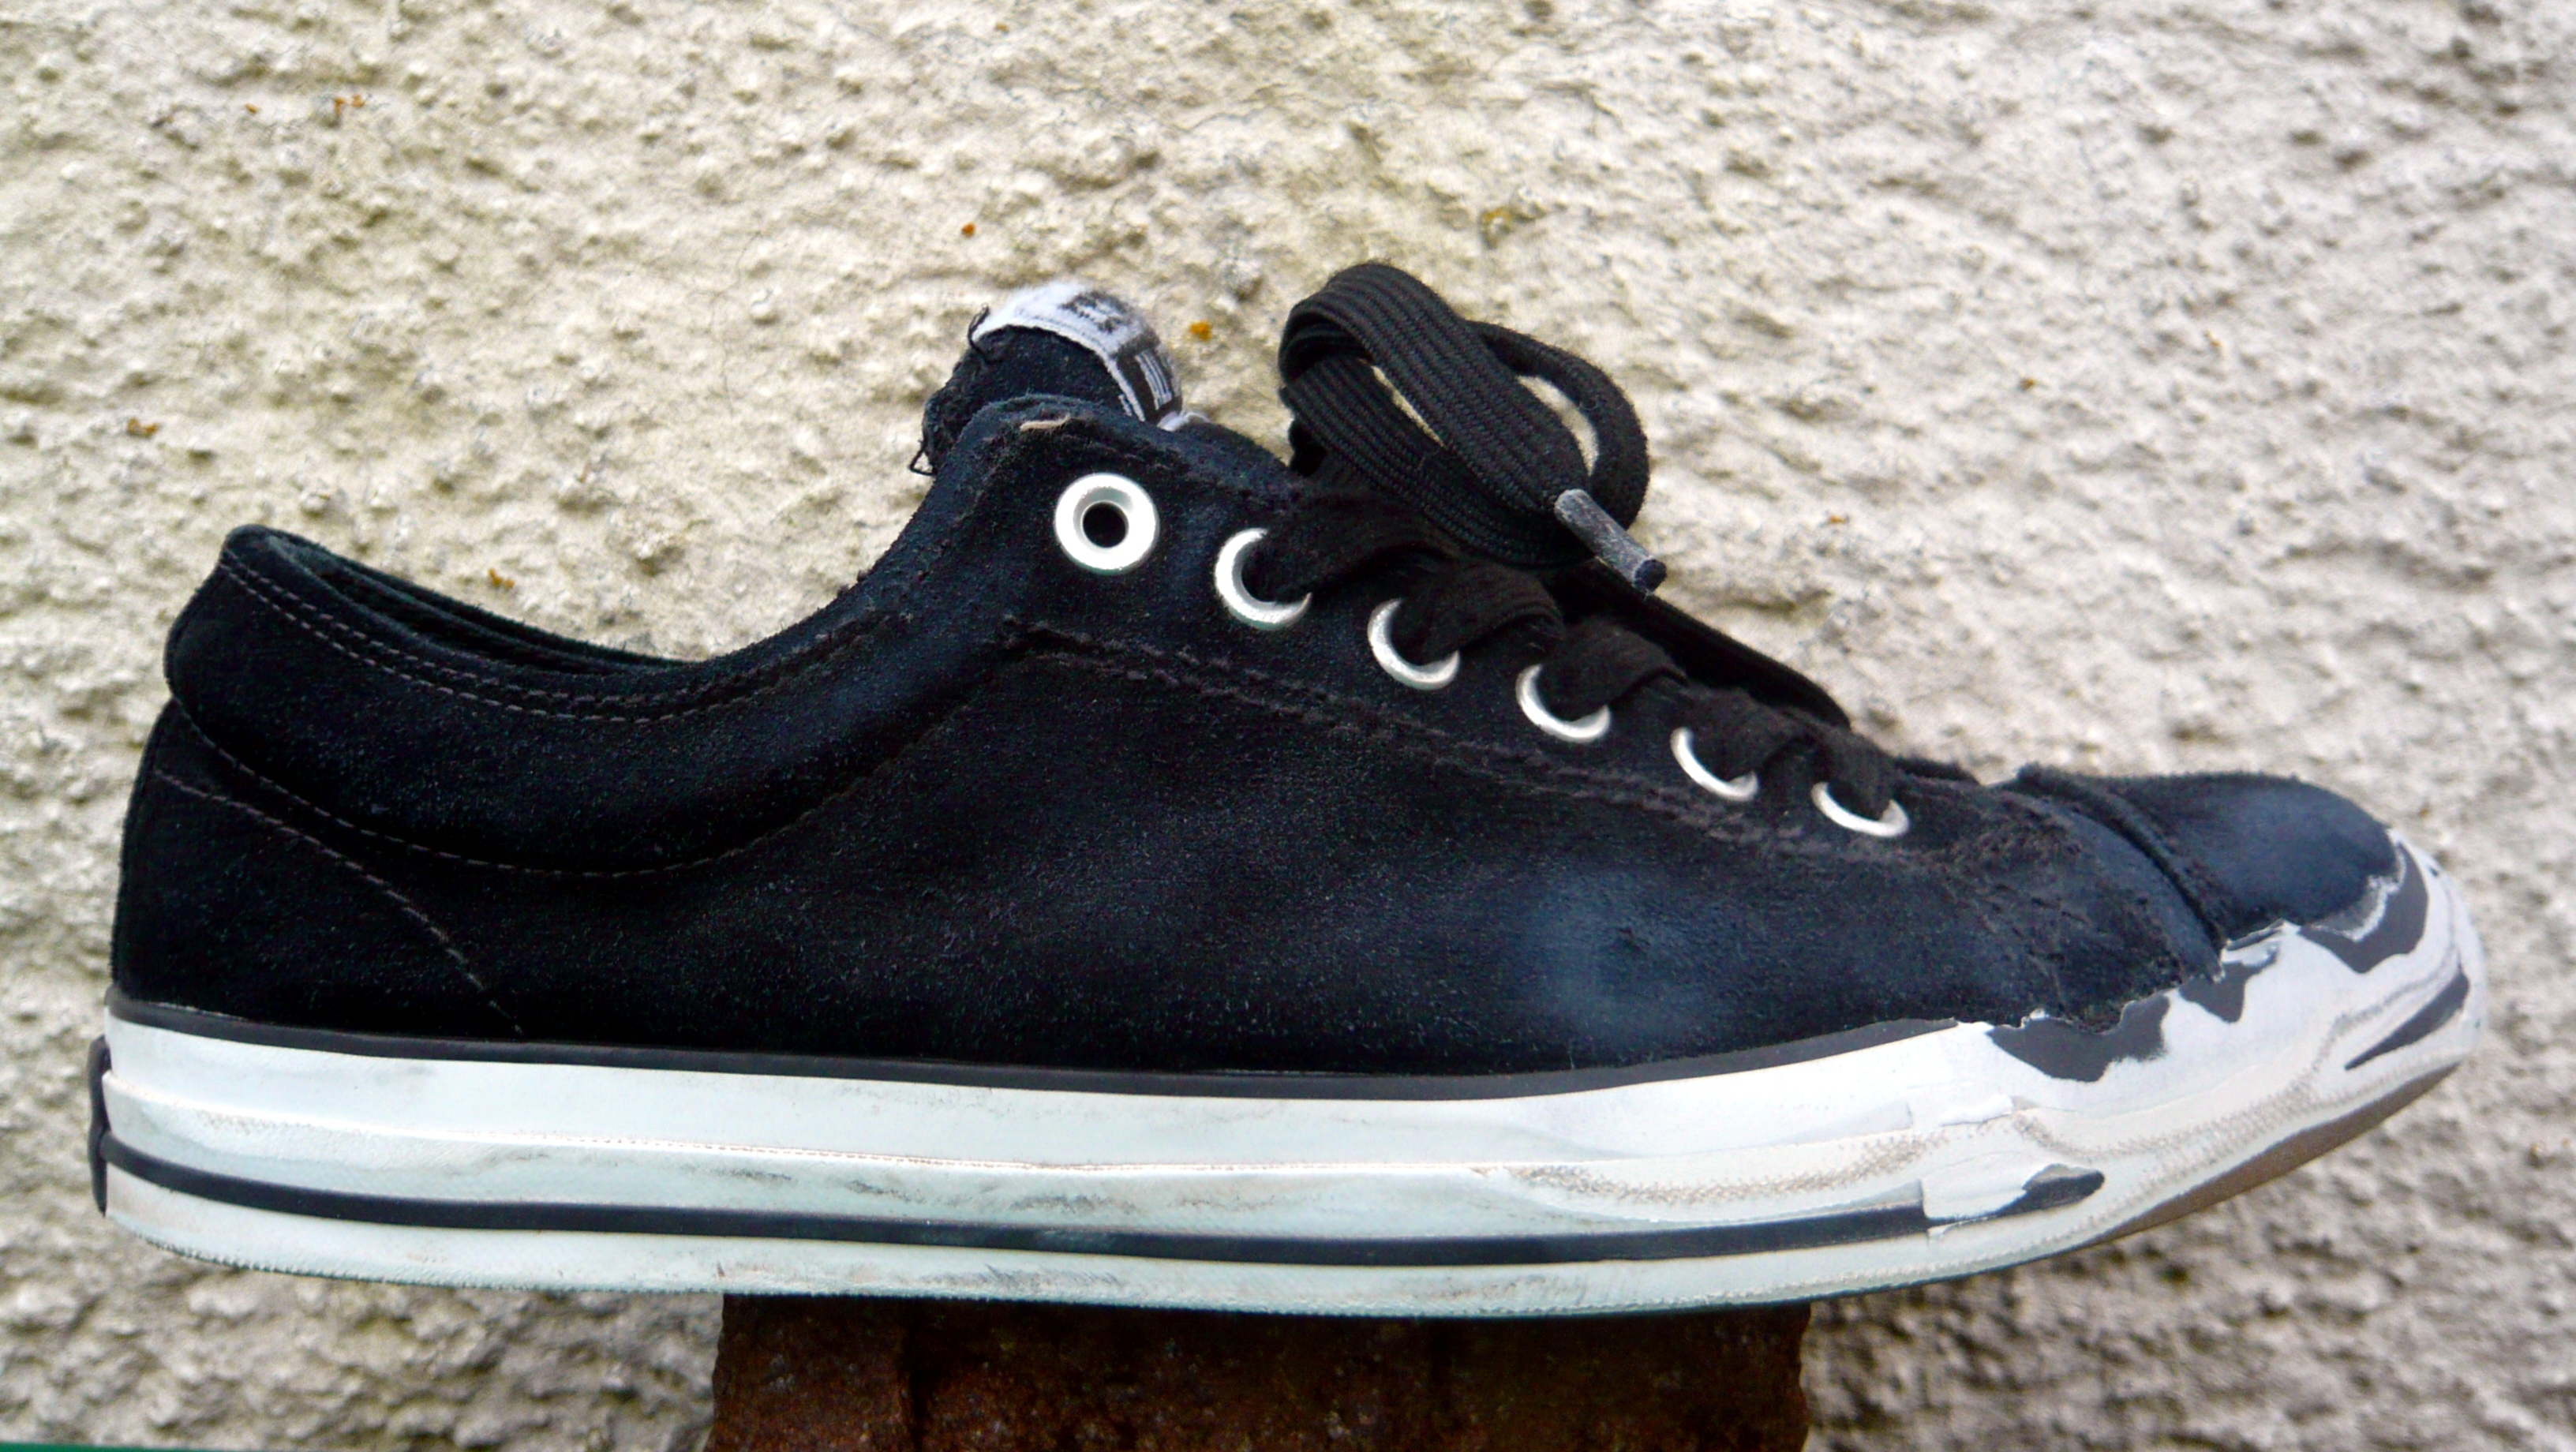 converse skate shoes review